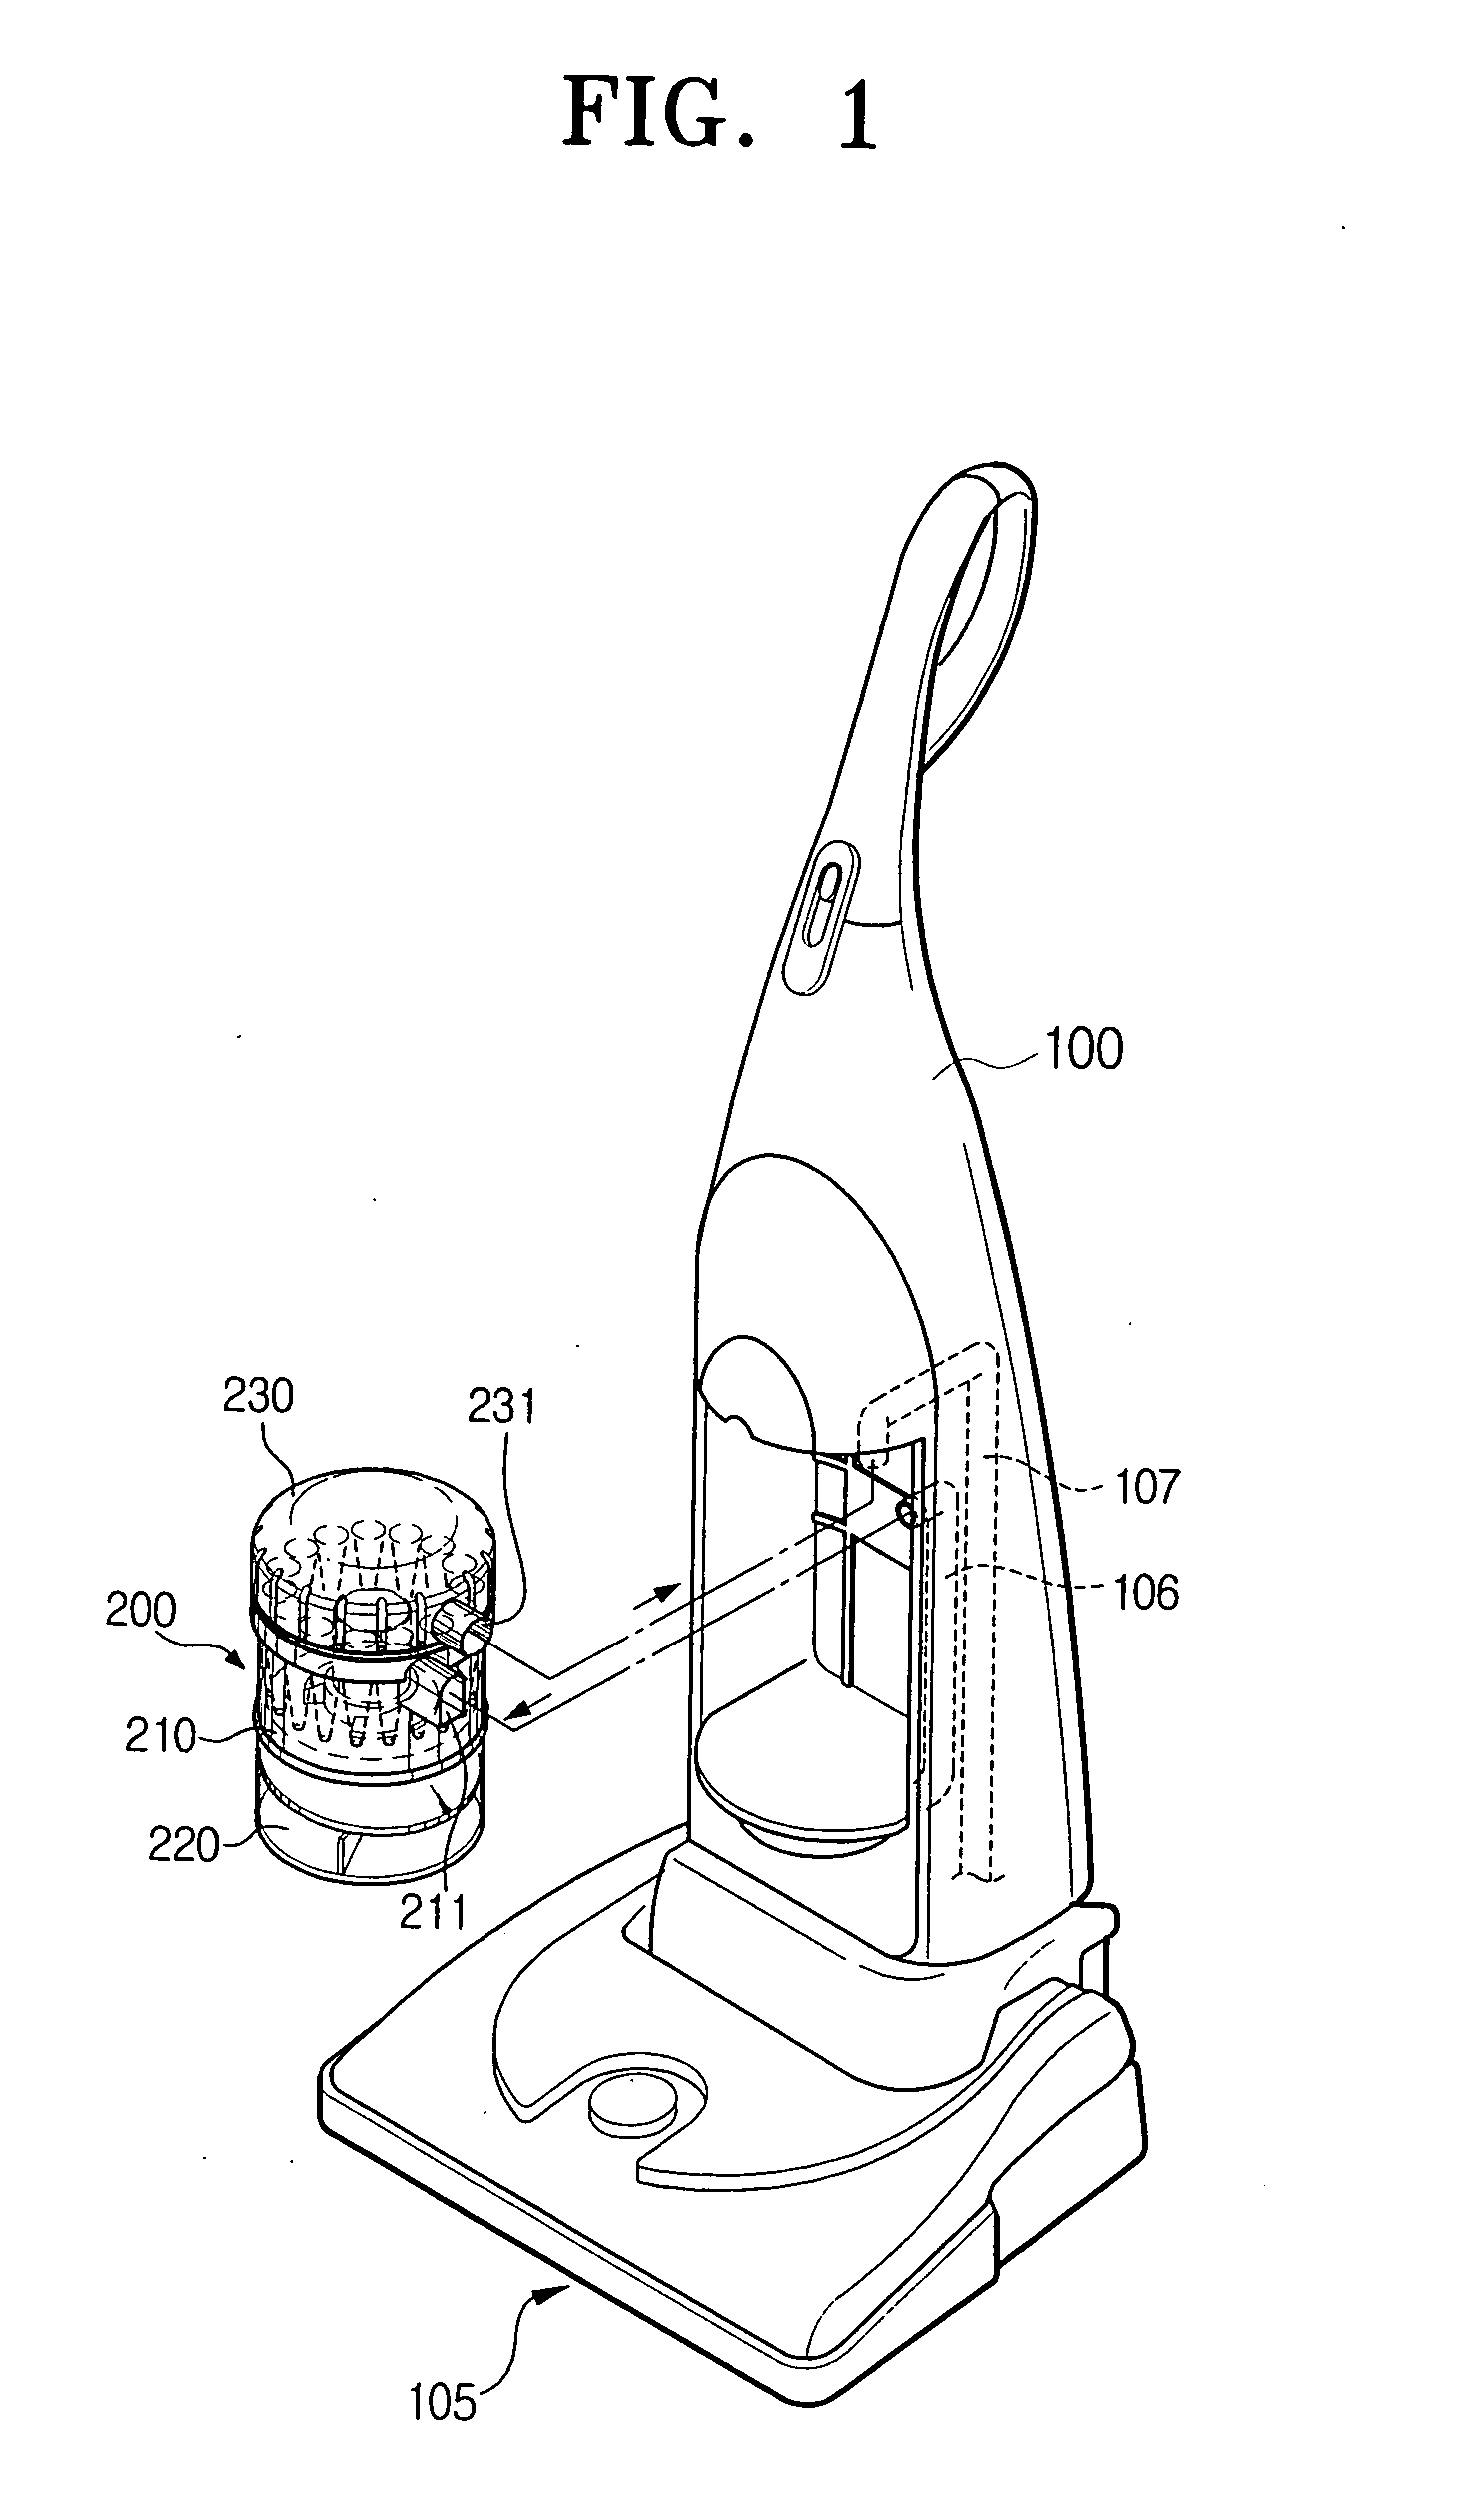 Cyclone dust collecting device for vacuum cleaner